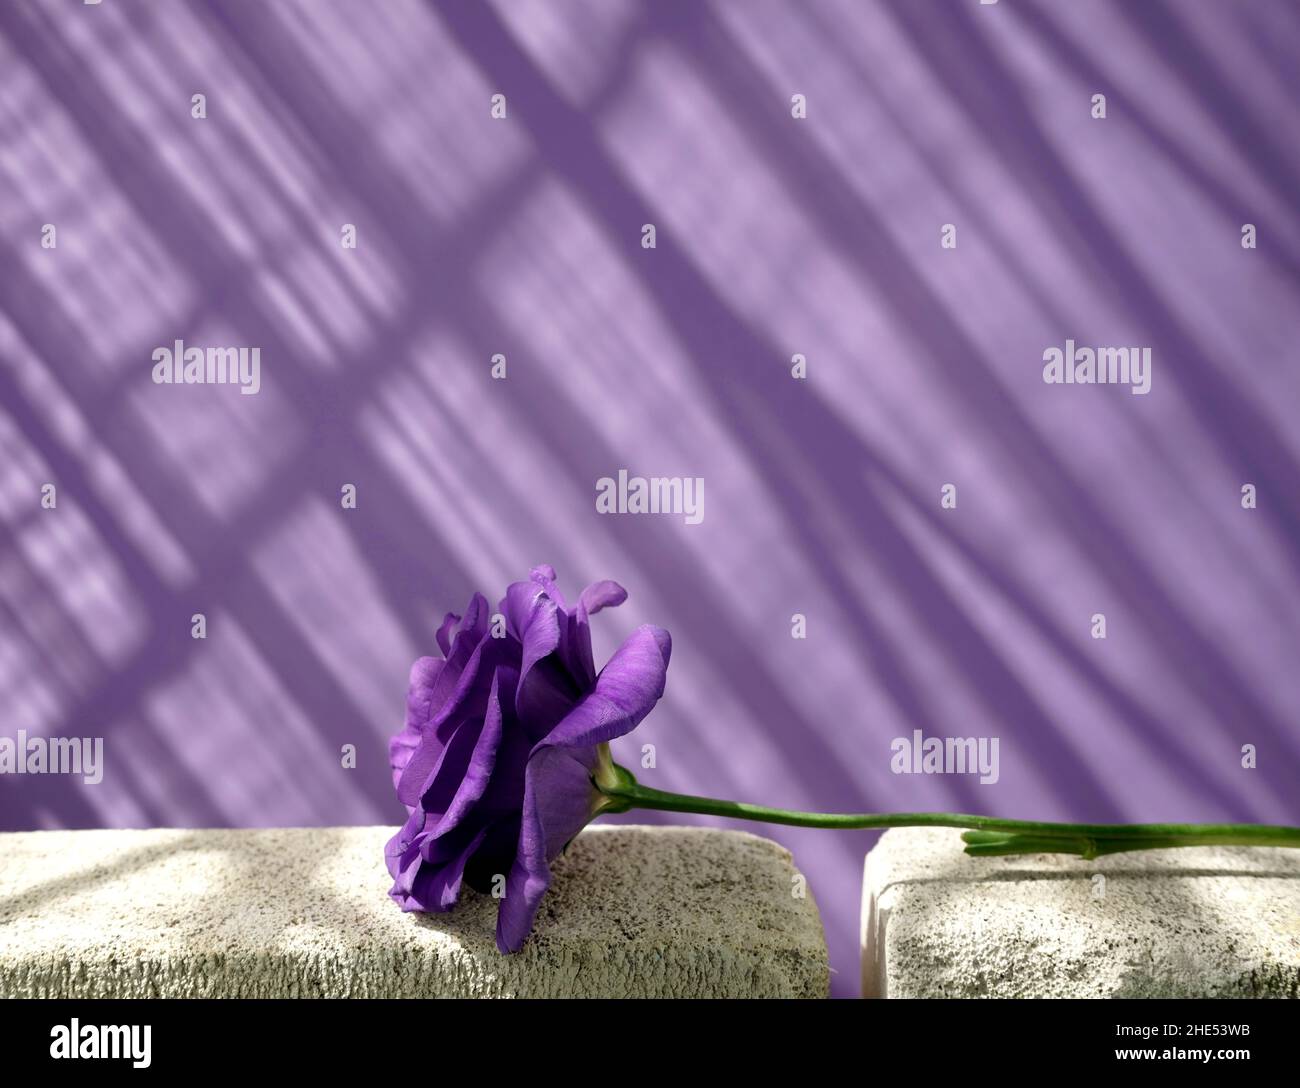 Violet flower Eustoma on white grunge concrete and drop shadow window against purple wall abstract texture background. Space for your text, design. Stock Photo